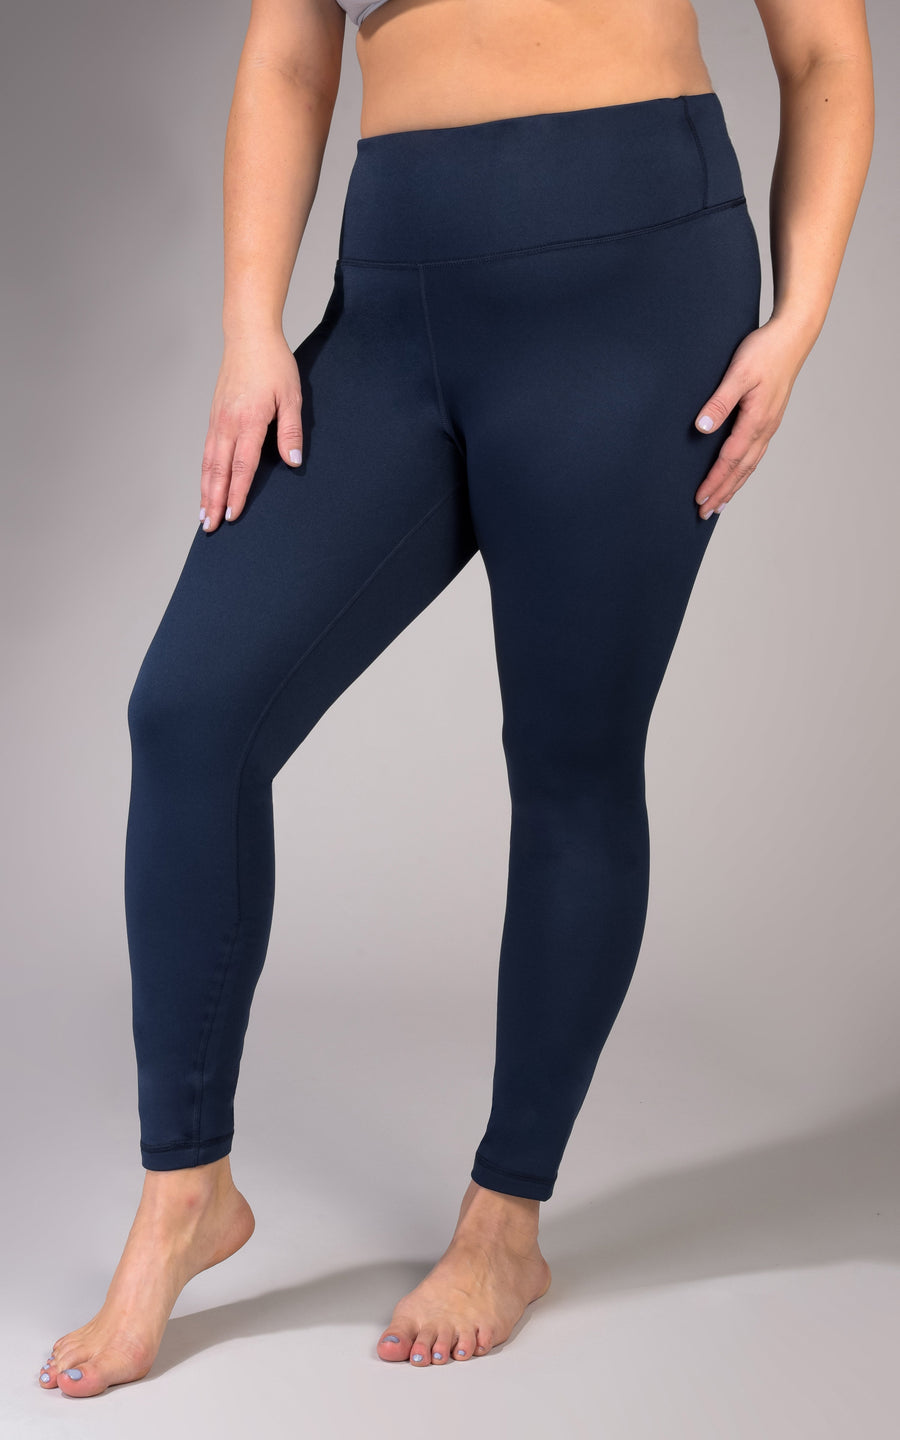 90 Degrees by Reflex Leggings Size M - $66 (26% Off Retail) New